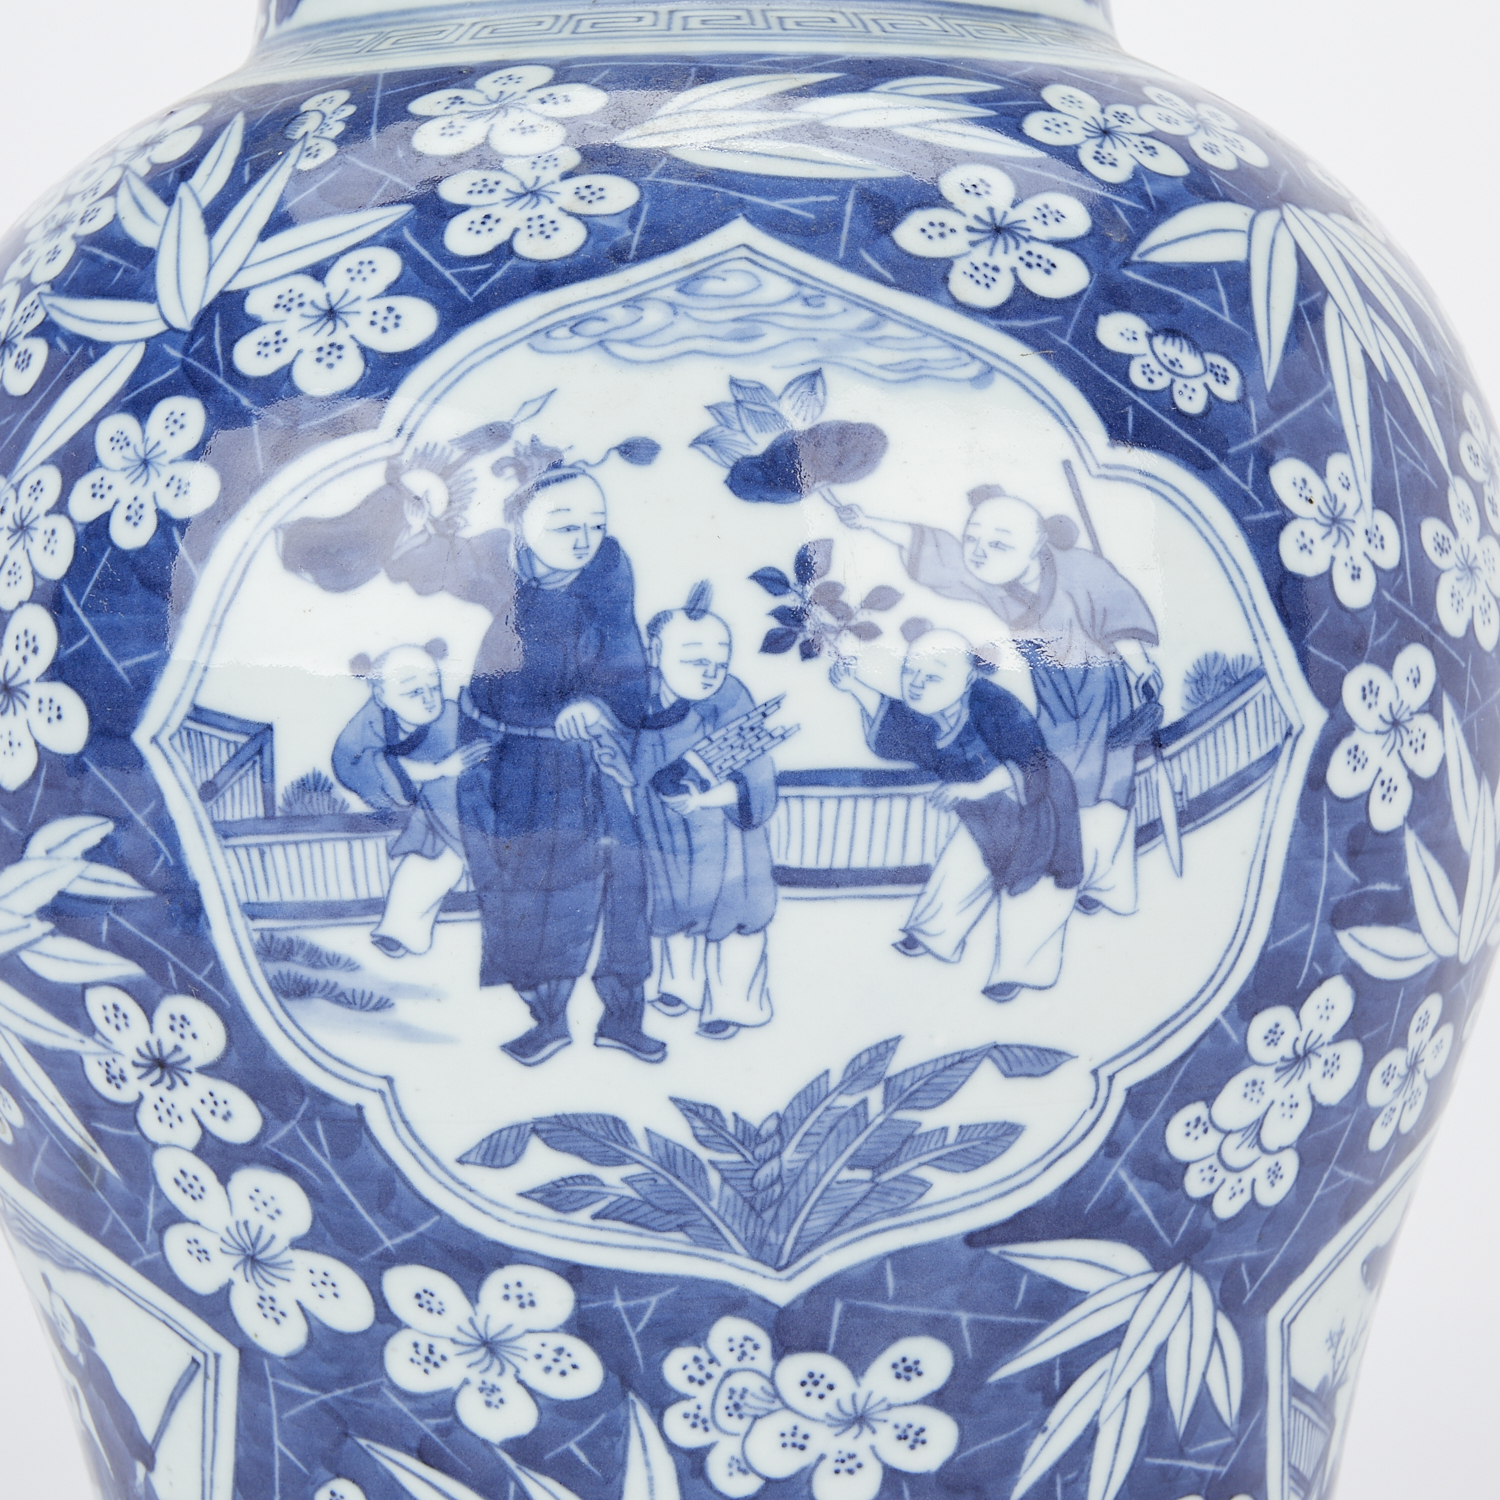 18th/19th c. Chinese B&W Porcelain Baluster Vase - Image 11 of 15